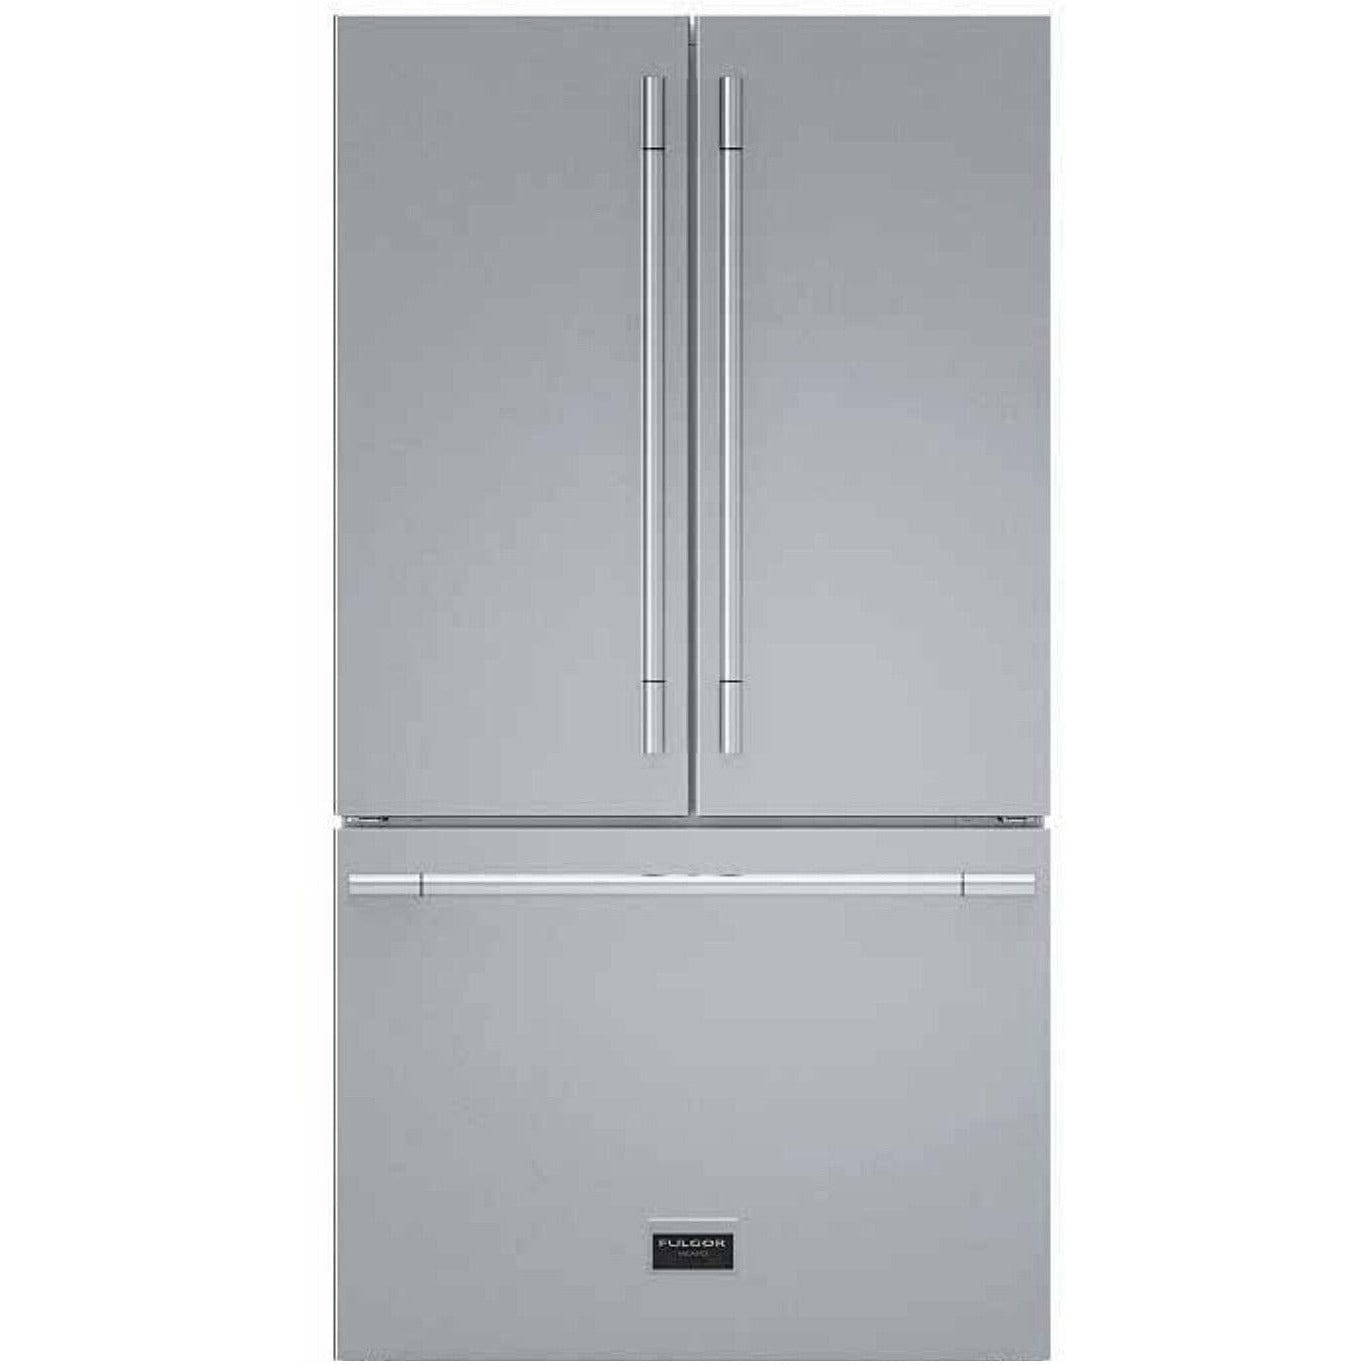 Fulgor Milano Package - 36" Gas Range, 36" French Door Refrigerator, 24" Built-In Dishwasher and 36" Under Cabinet Range Hood Ranges F4PGR366S2F6FBM36S2 Luxury Appliances Direct